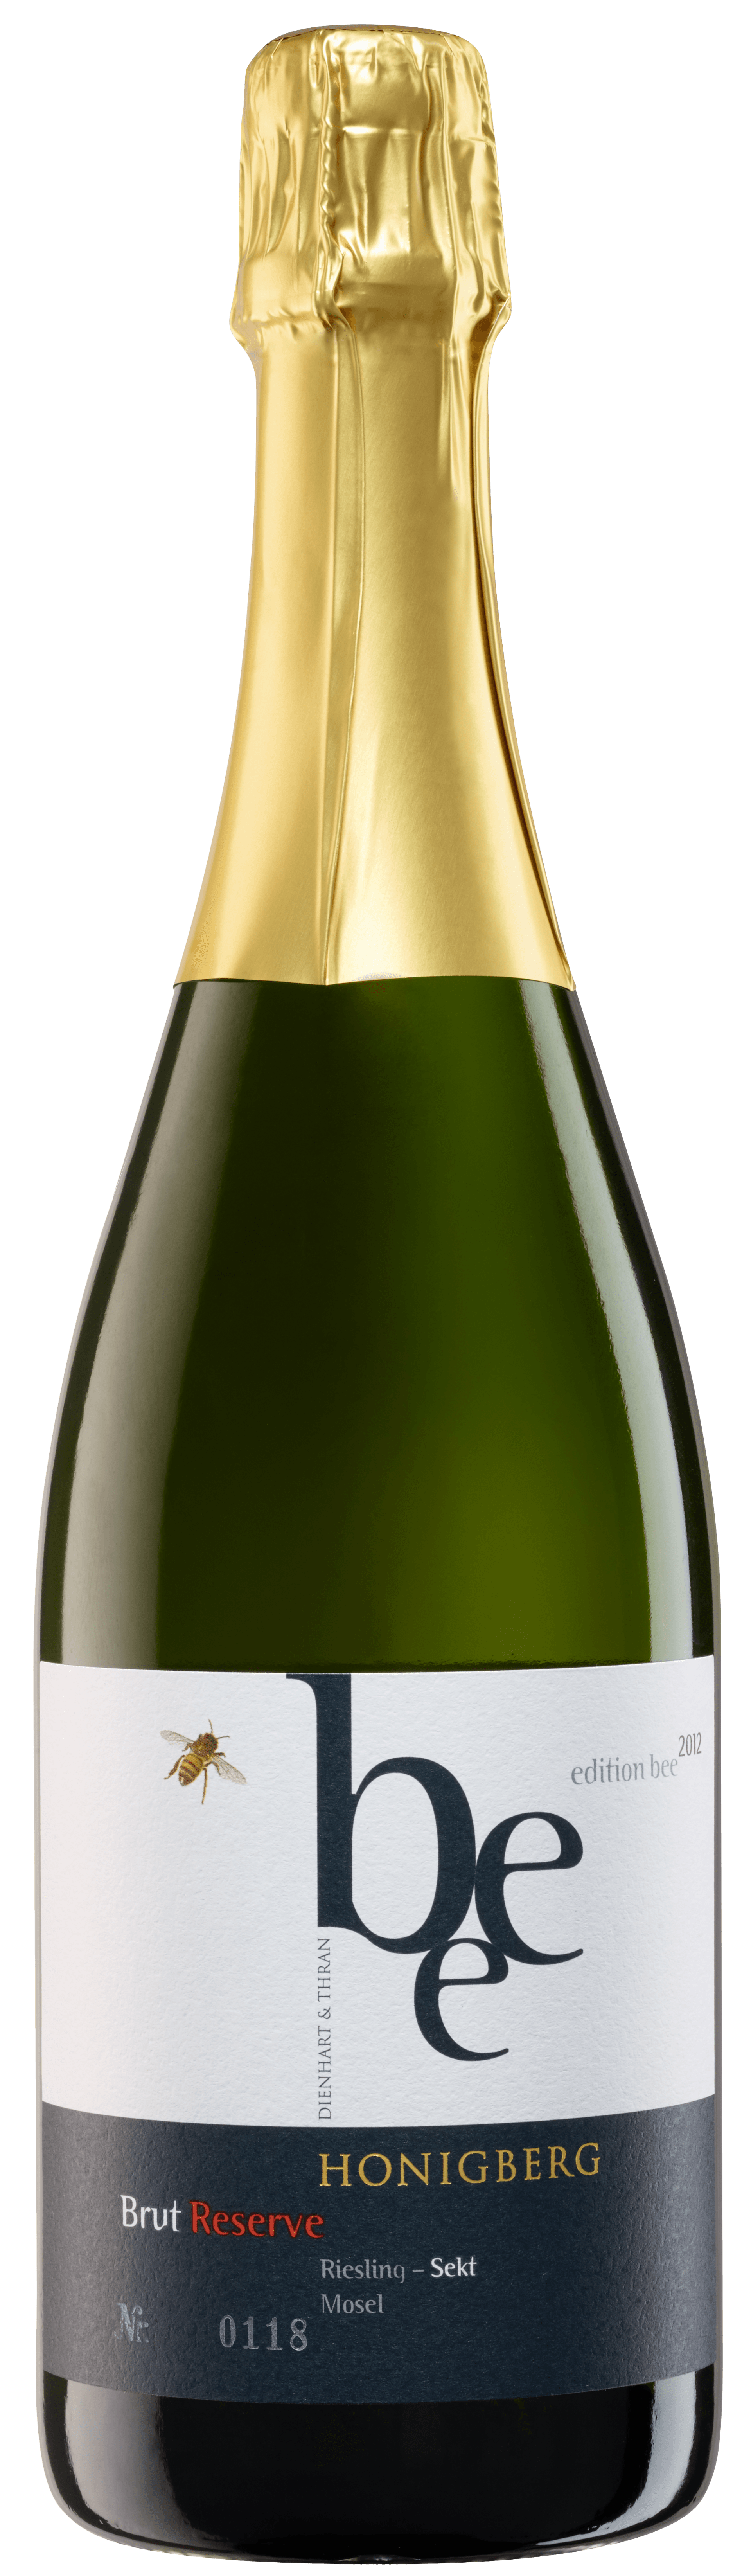 Riesling brut reserve